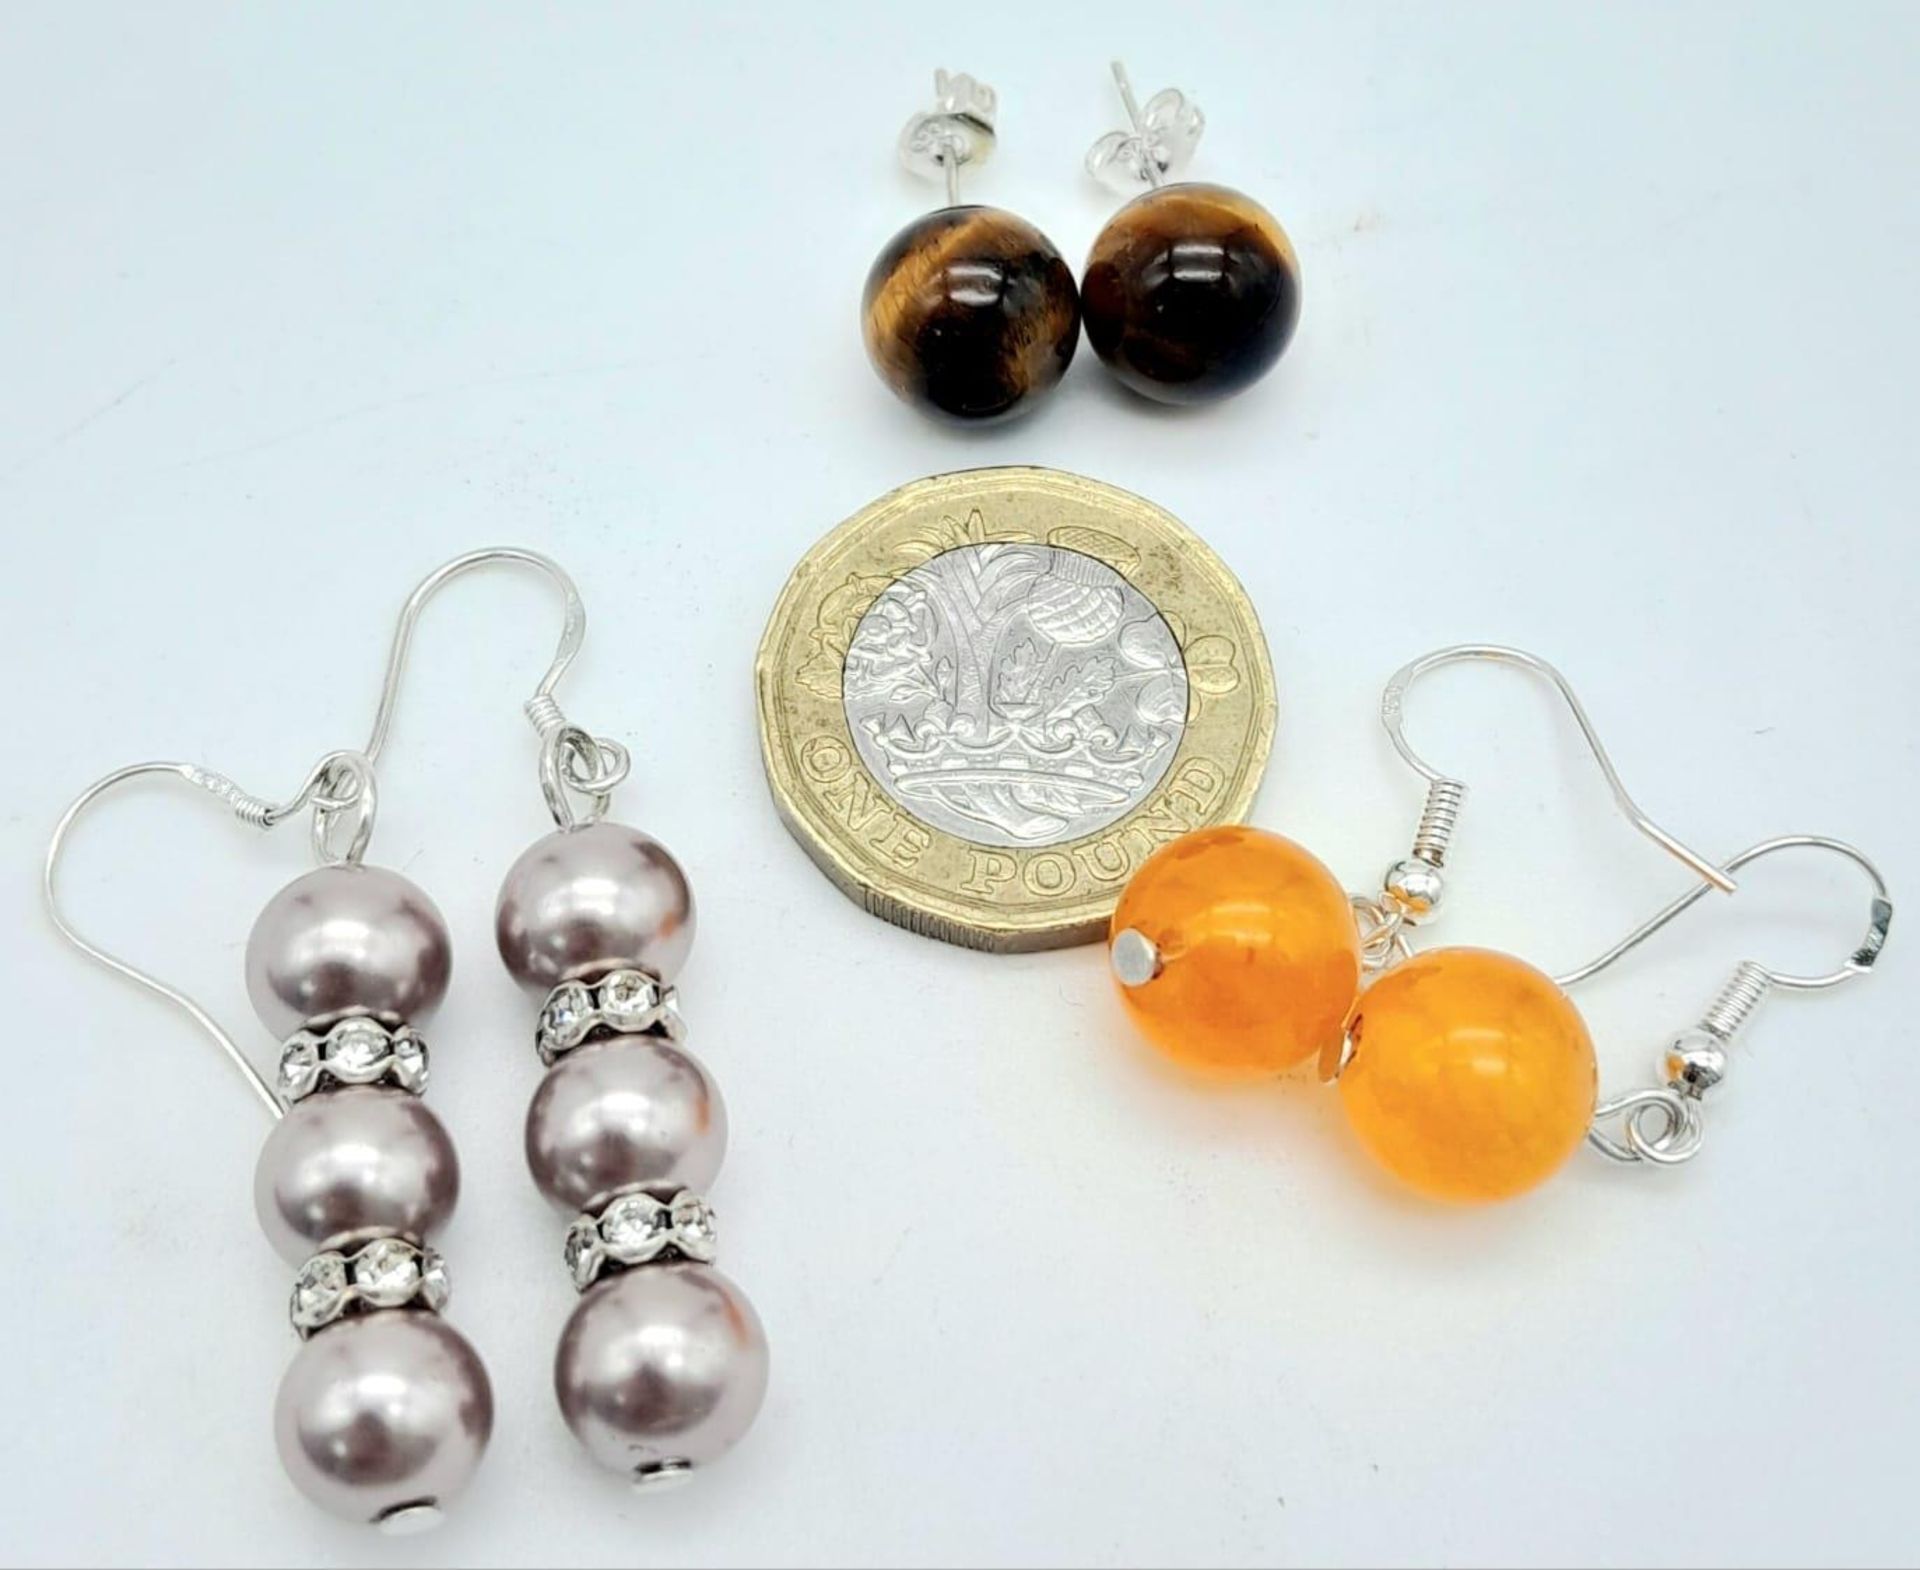 Three Pairs of Different Style 925 Silver Earrings - Orange jade, Tigers eye and Lavender pearl - Image 2 of 3